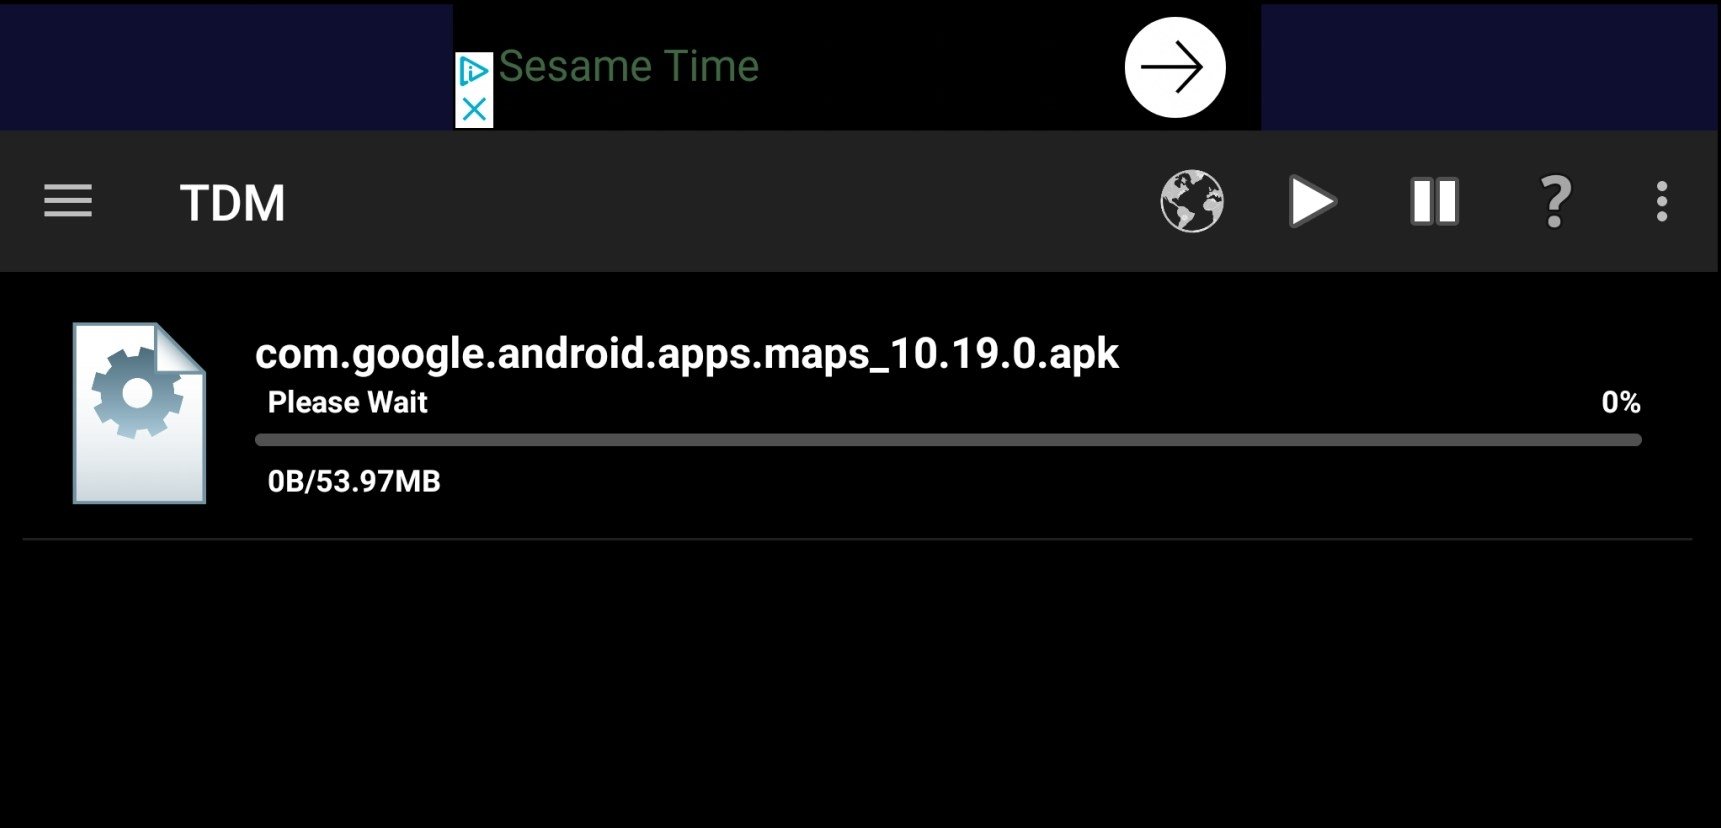 turbo download manager apk mirror